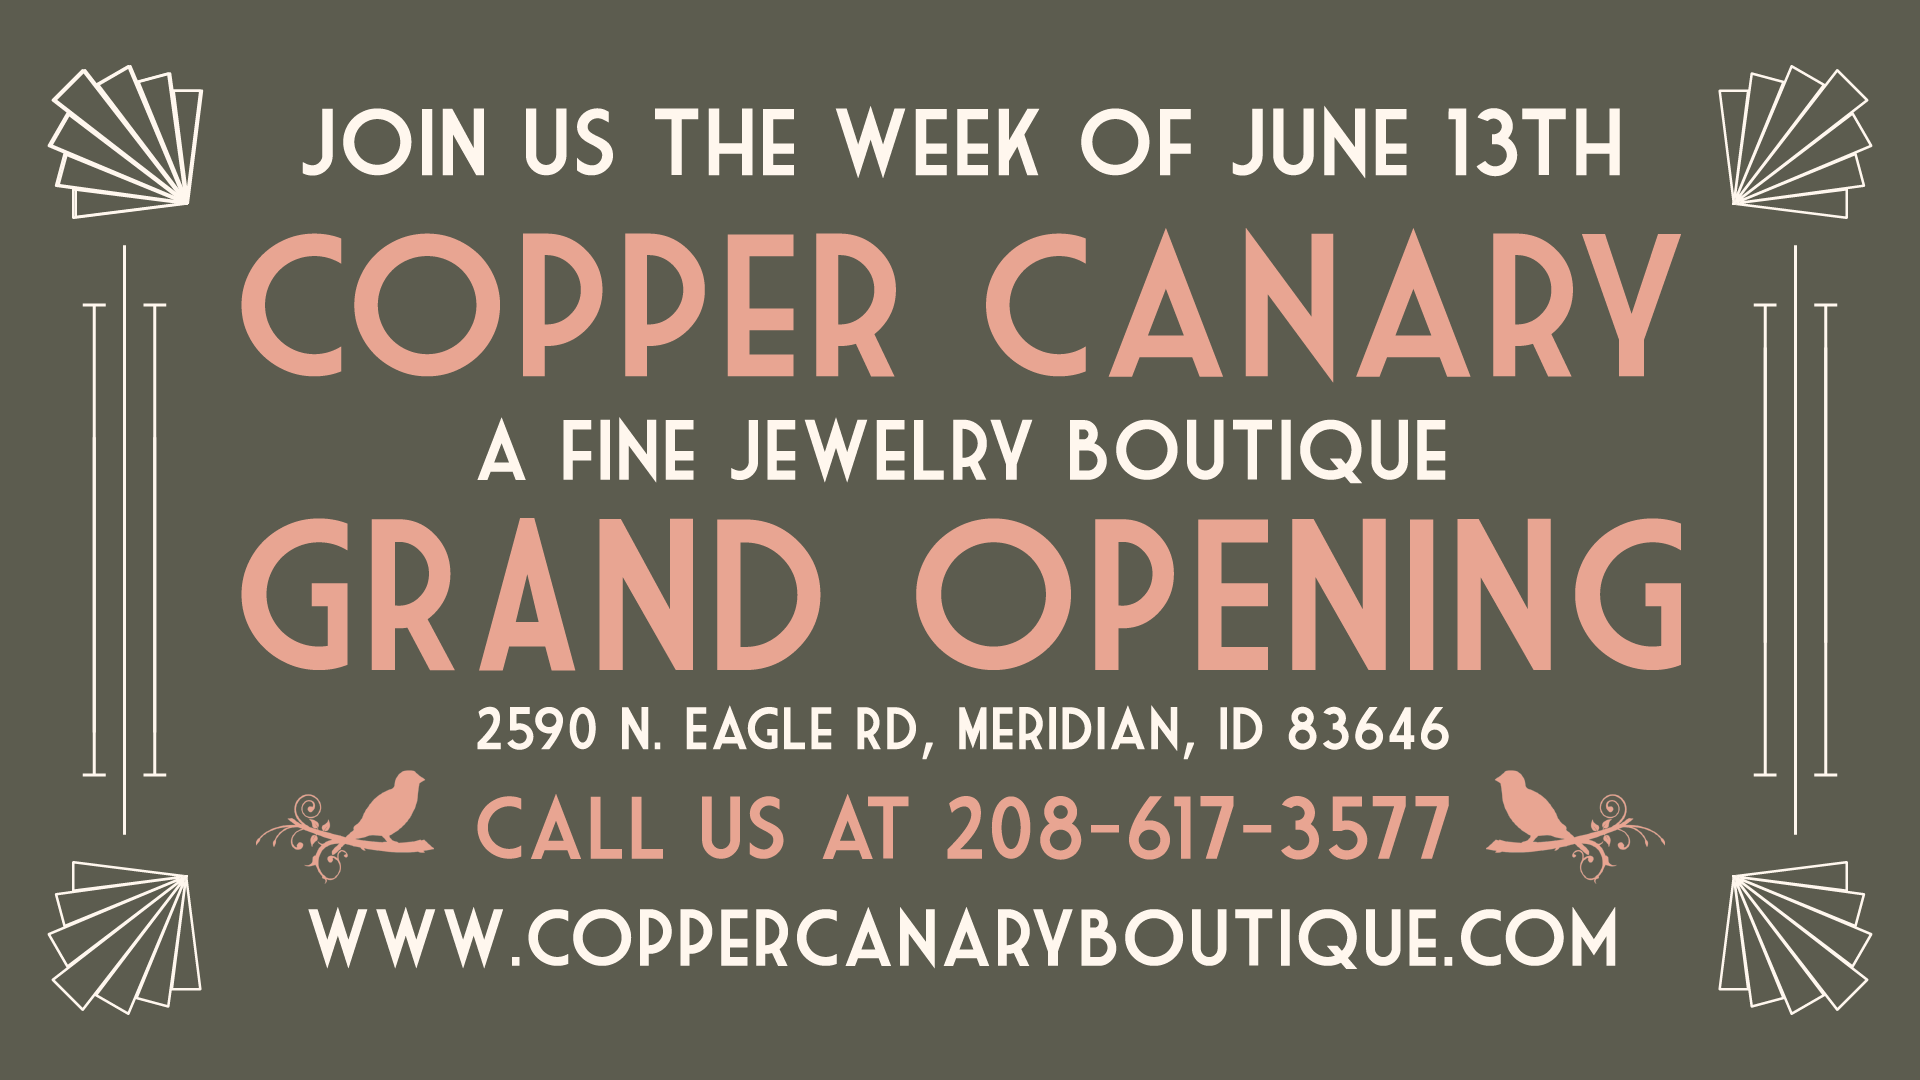 Grand Opening invitation for Copper Canary